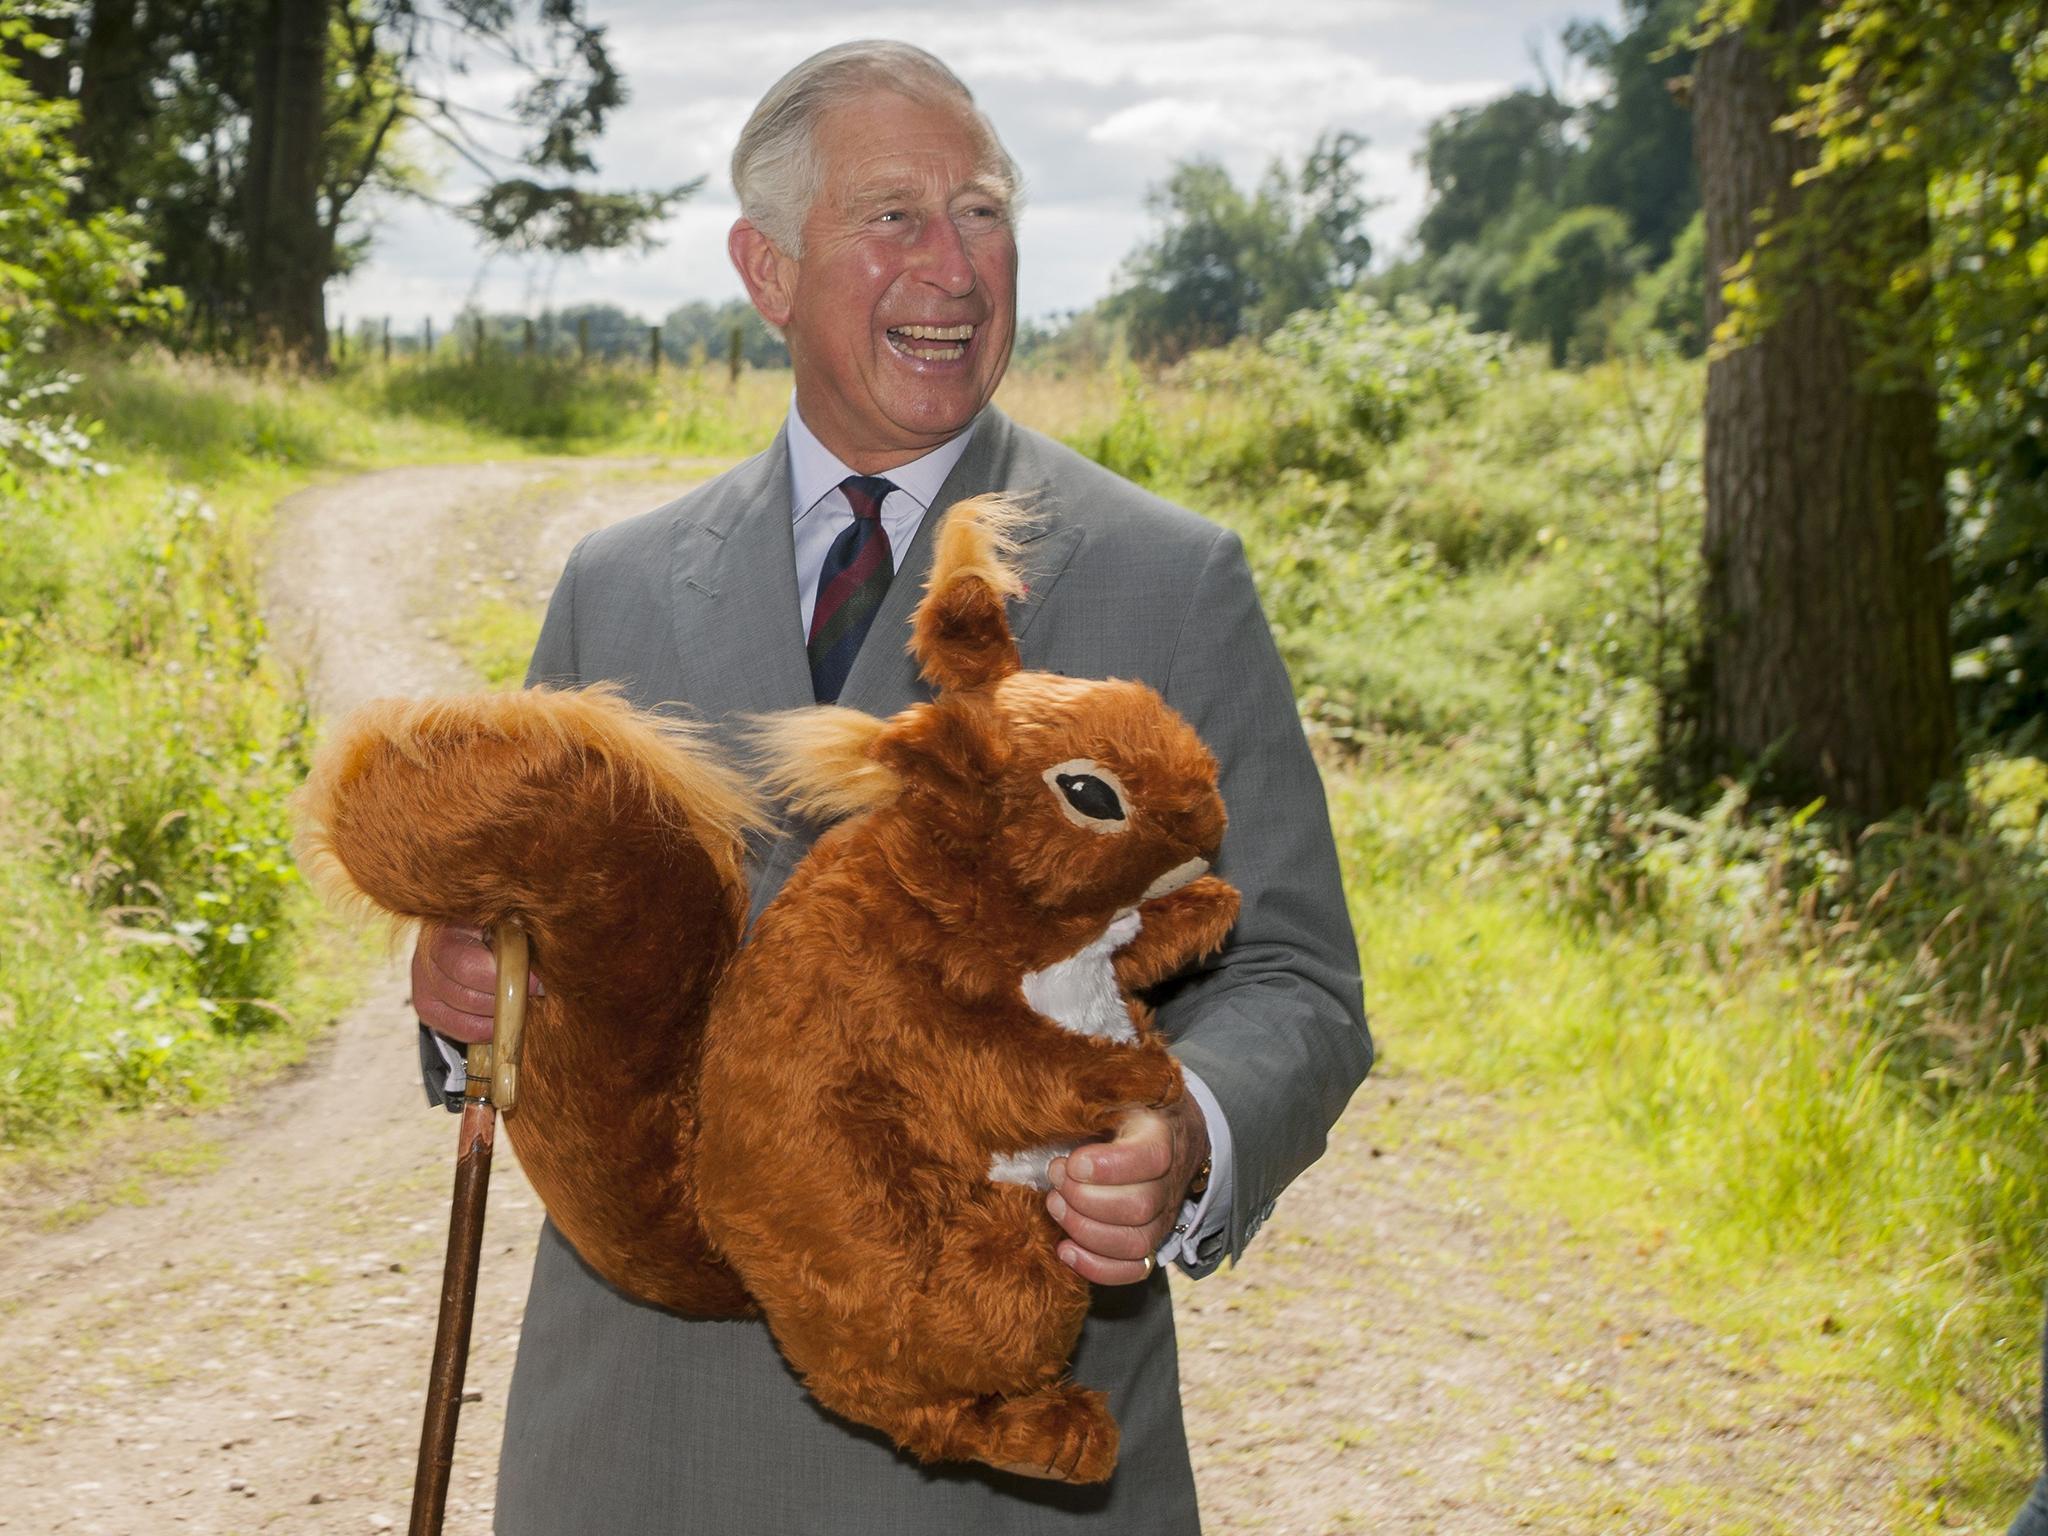 The Prince of Wales receives a toy red squirrel for Prince George, presented by the Scottish Wildlife Trust during the visit to Murthly Castle, Perthshire to attend a reception mark the Trust's 50th anniversary